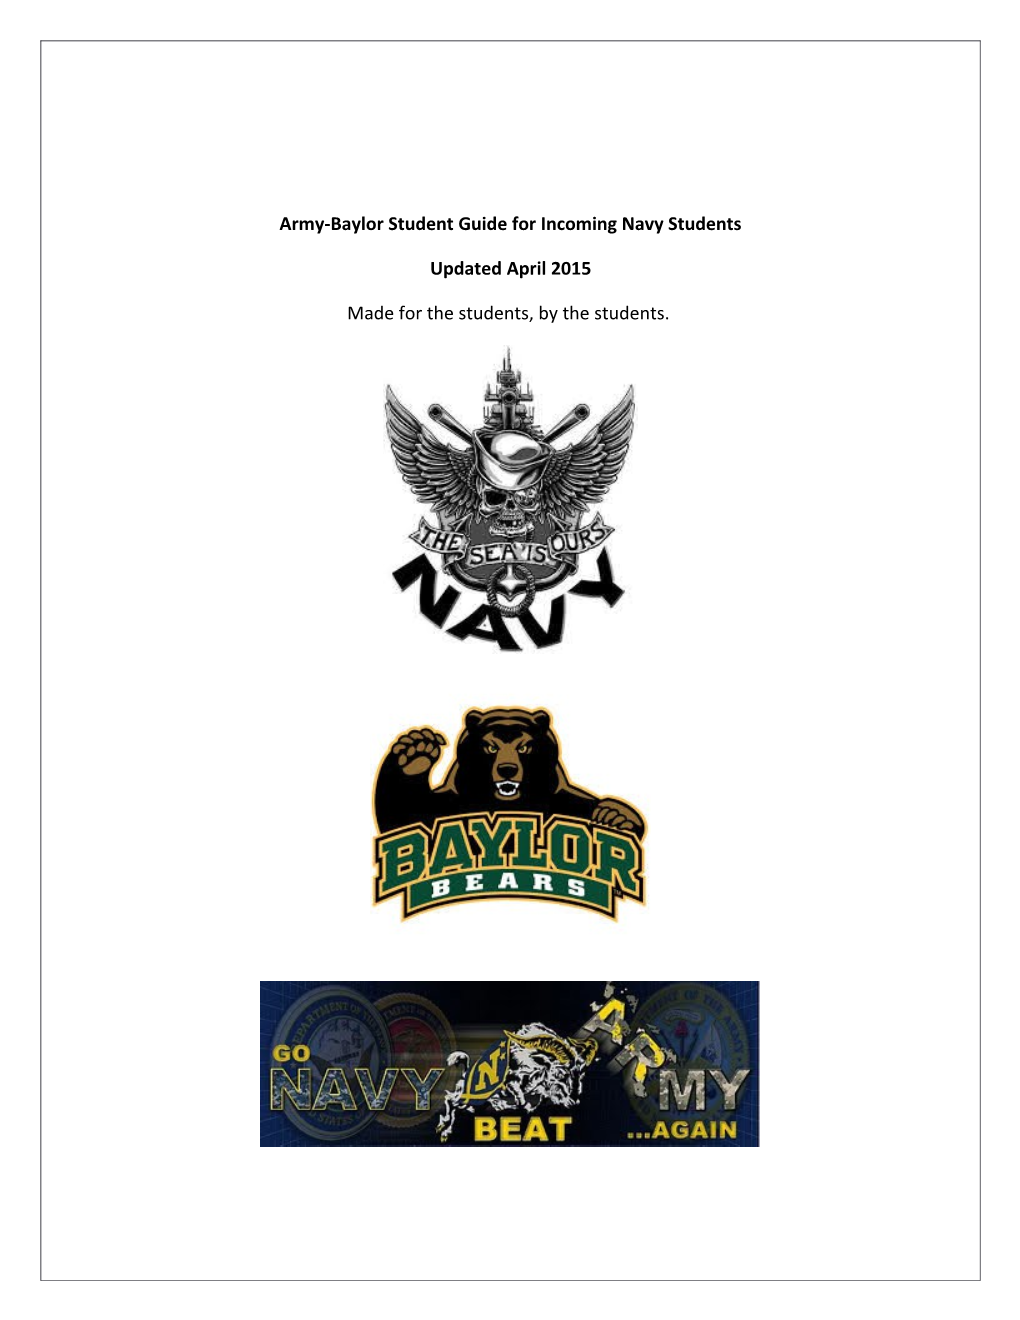 Army-Baylor Student Guide for Incoming Navystudents